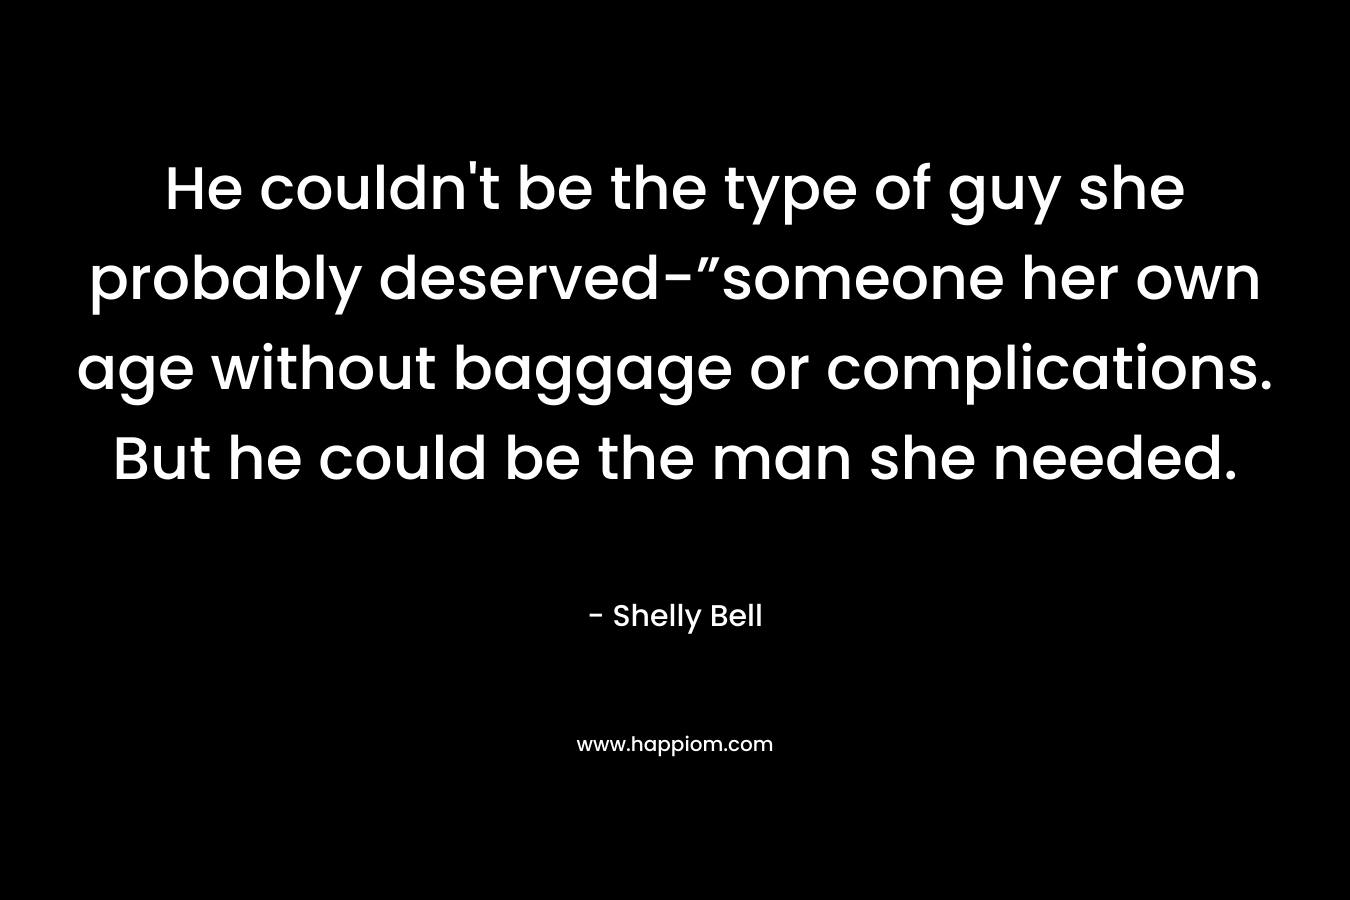 He couldn’t be the type of guy she probably deserved-”someone her own age without baggage or complications. But he could be the man she needed. – Shelly Bell